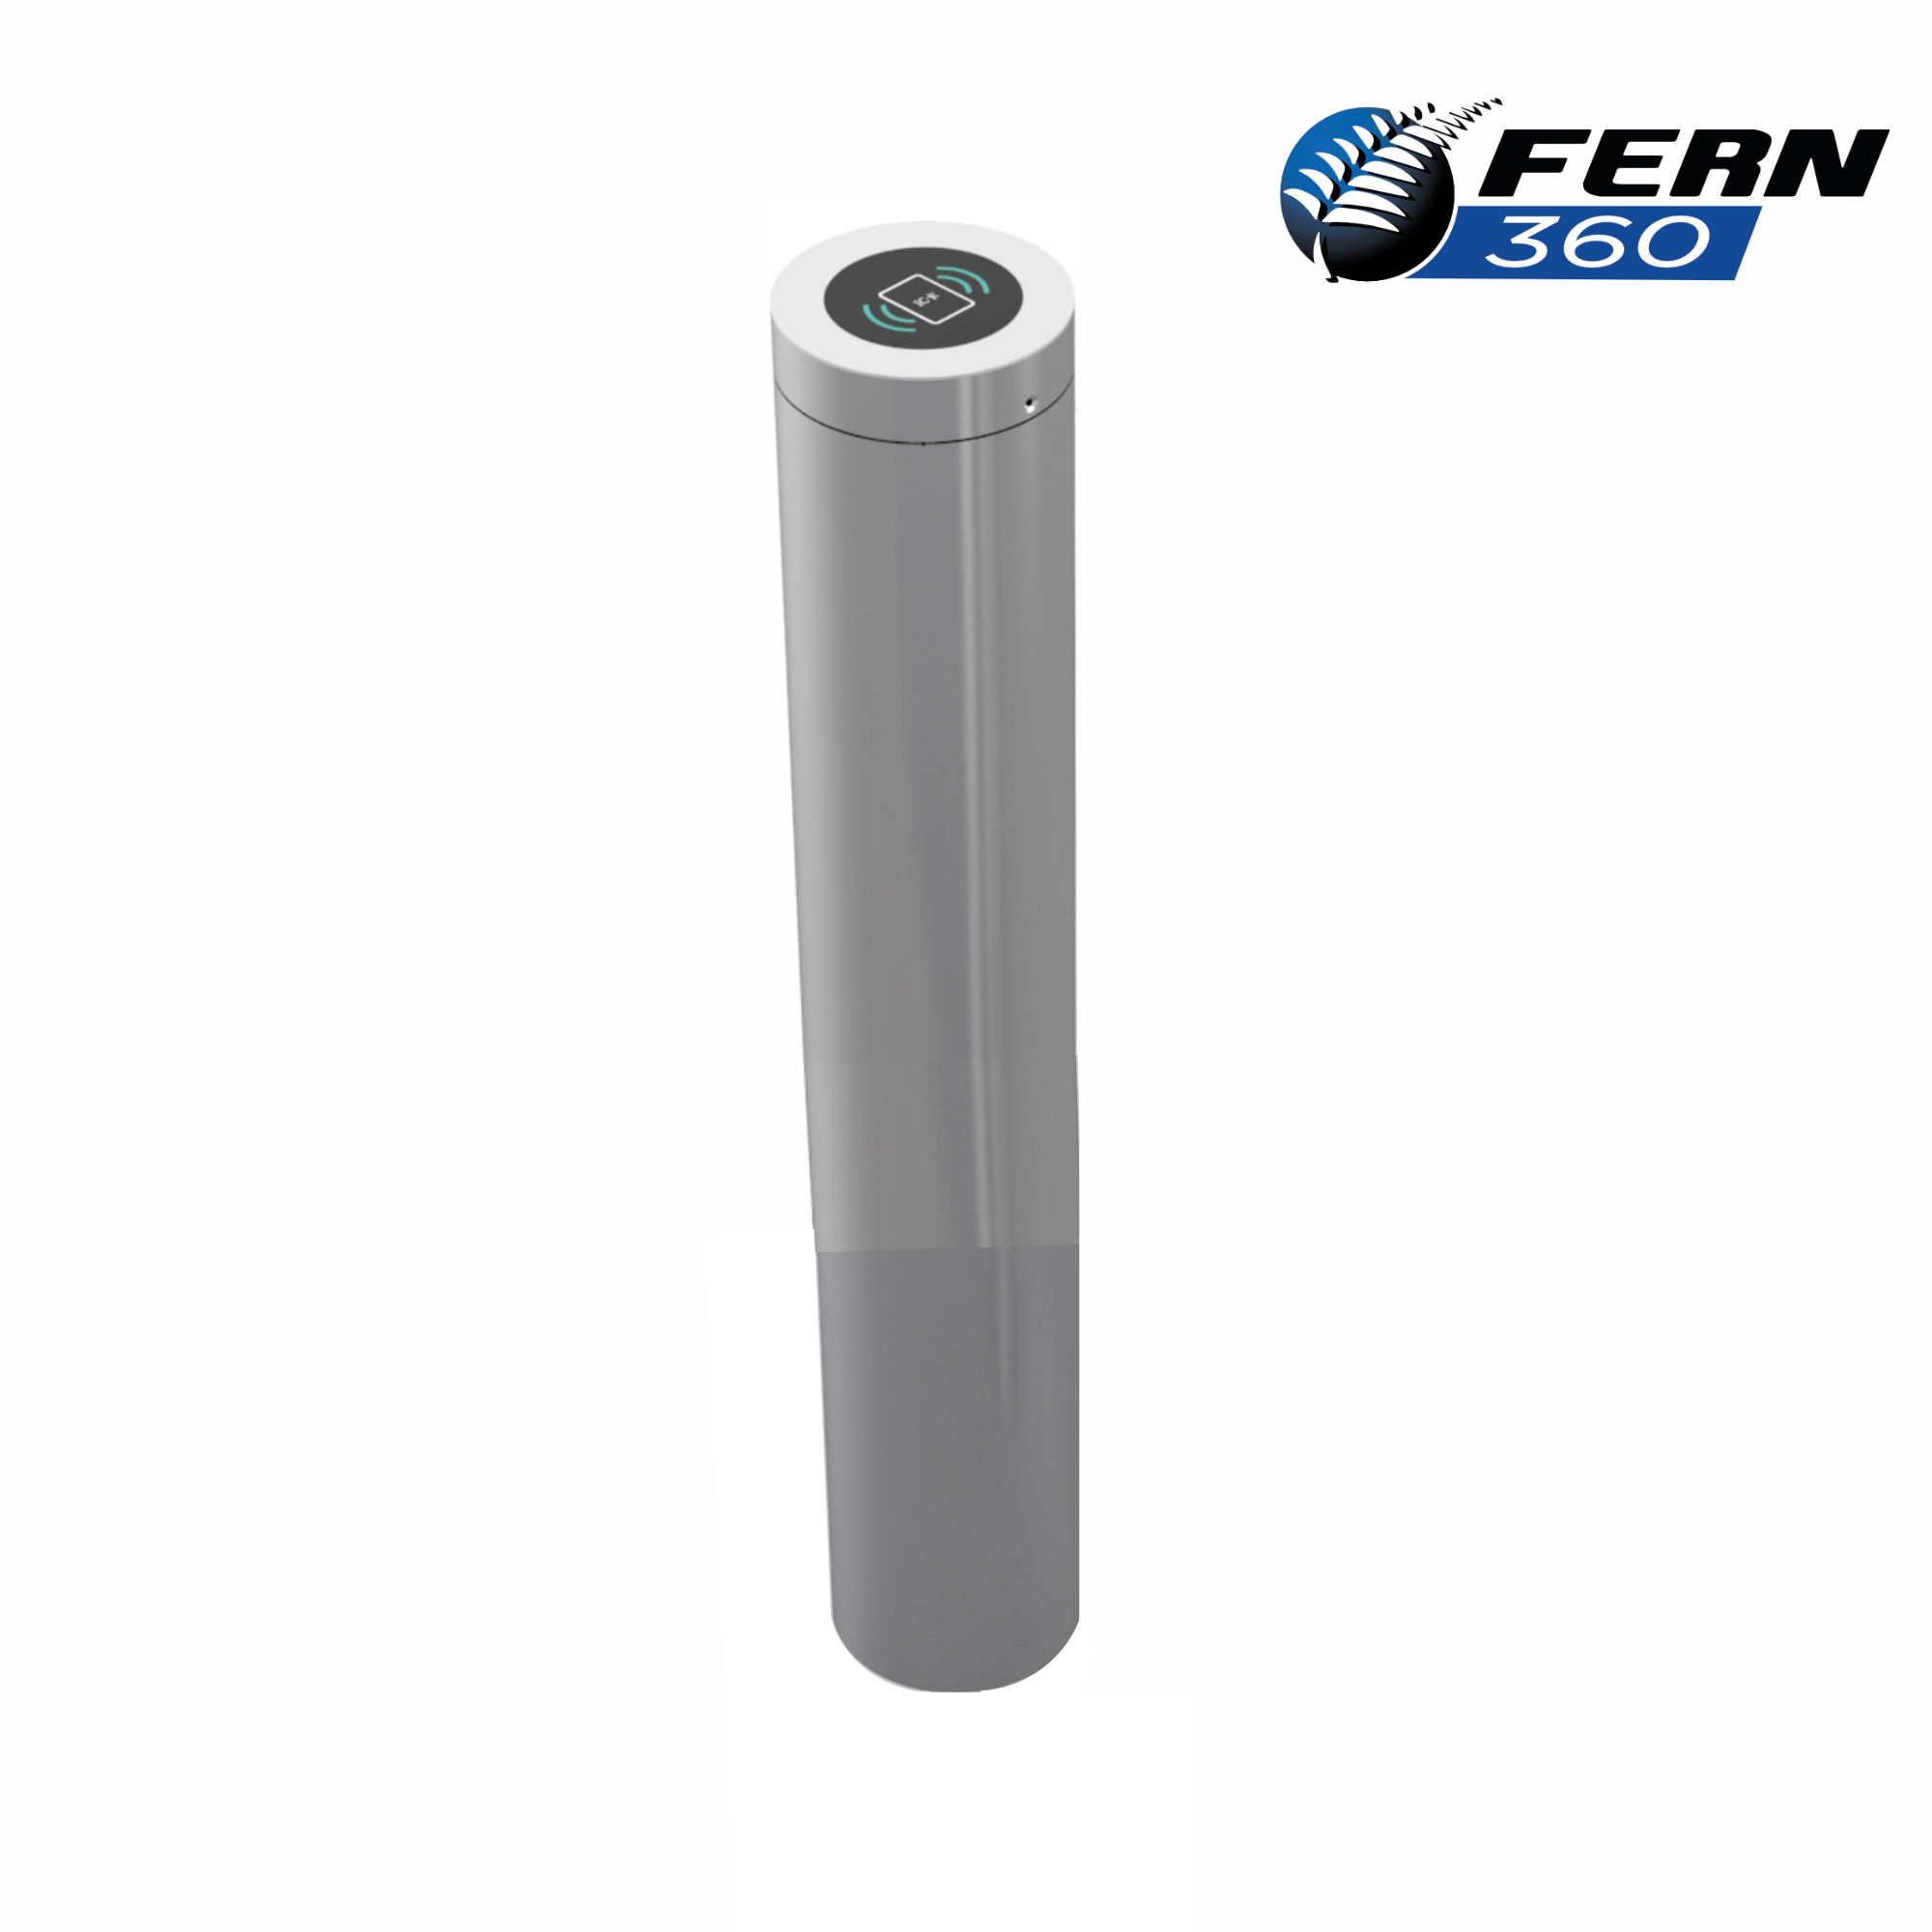 FGES-SWGRP-316 - FERN360 - Stainless Steel SUS316 Access Control Reader Post